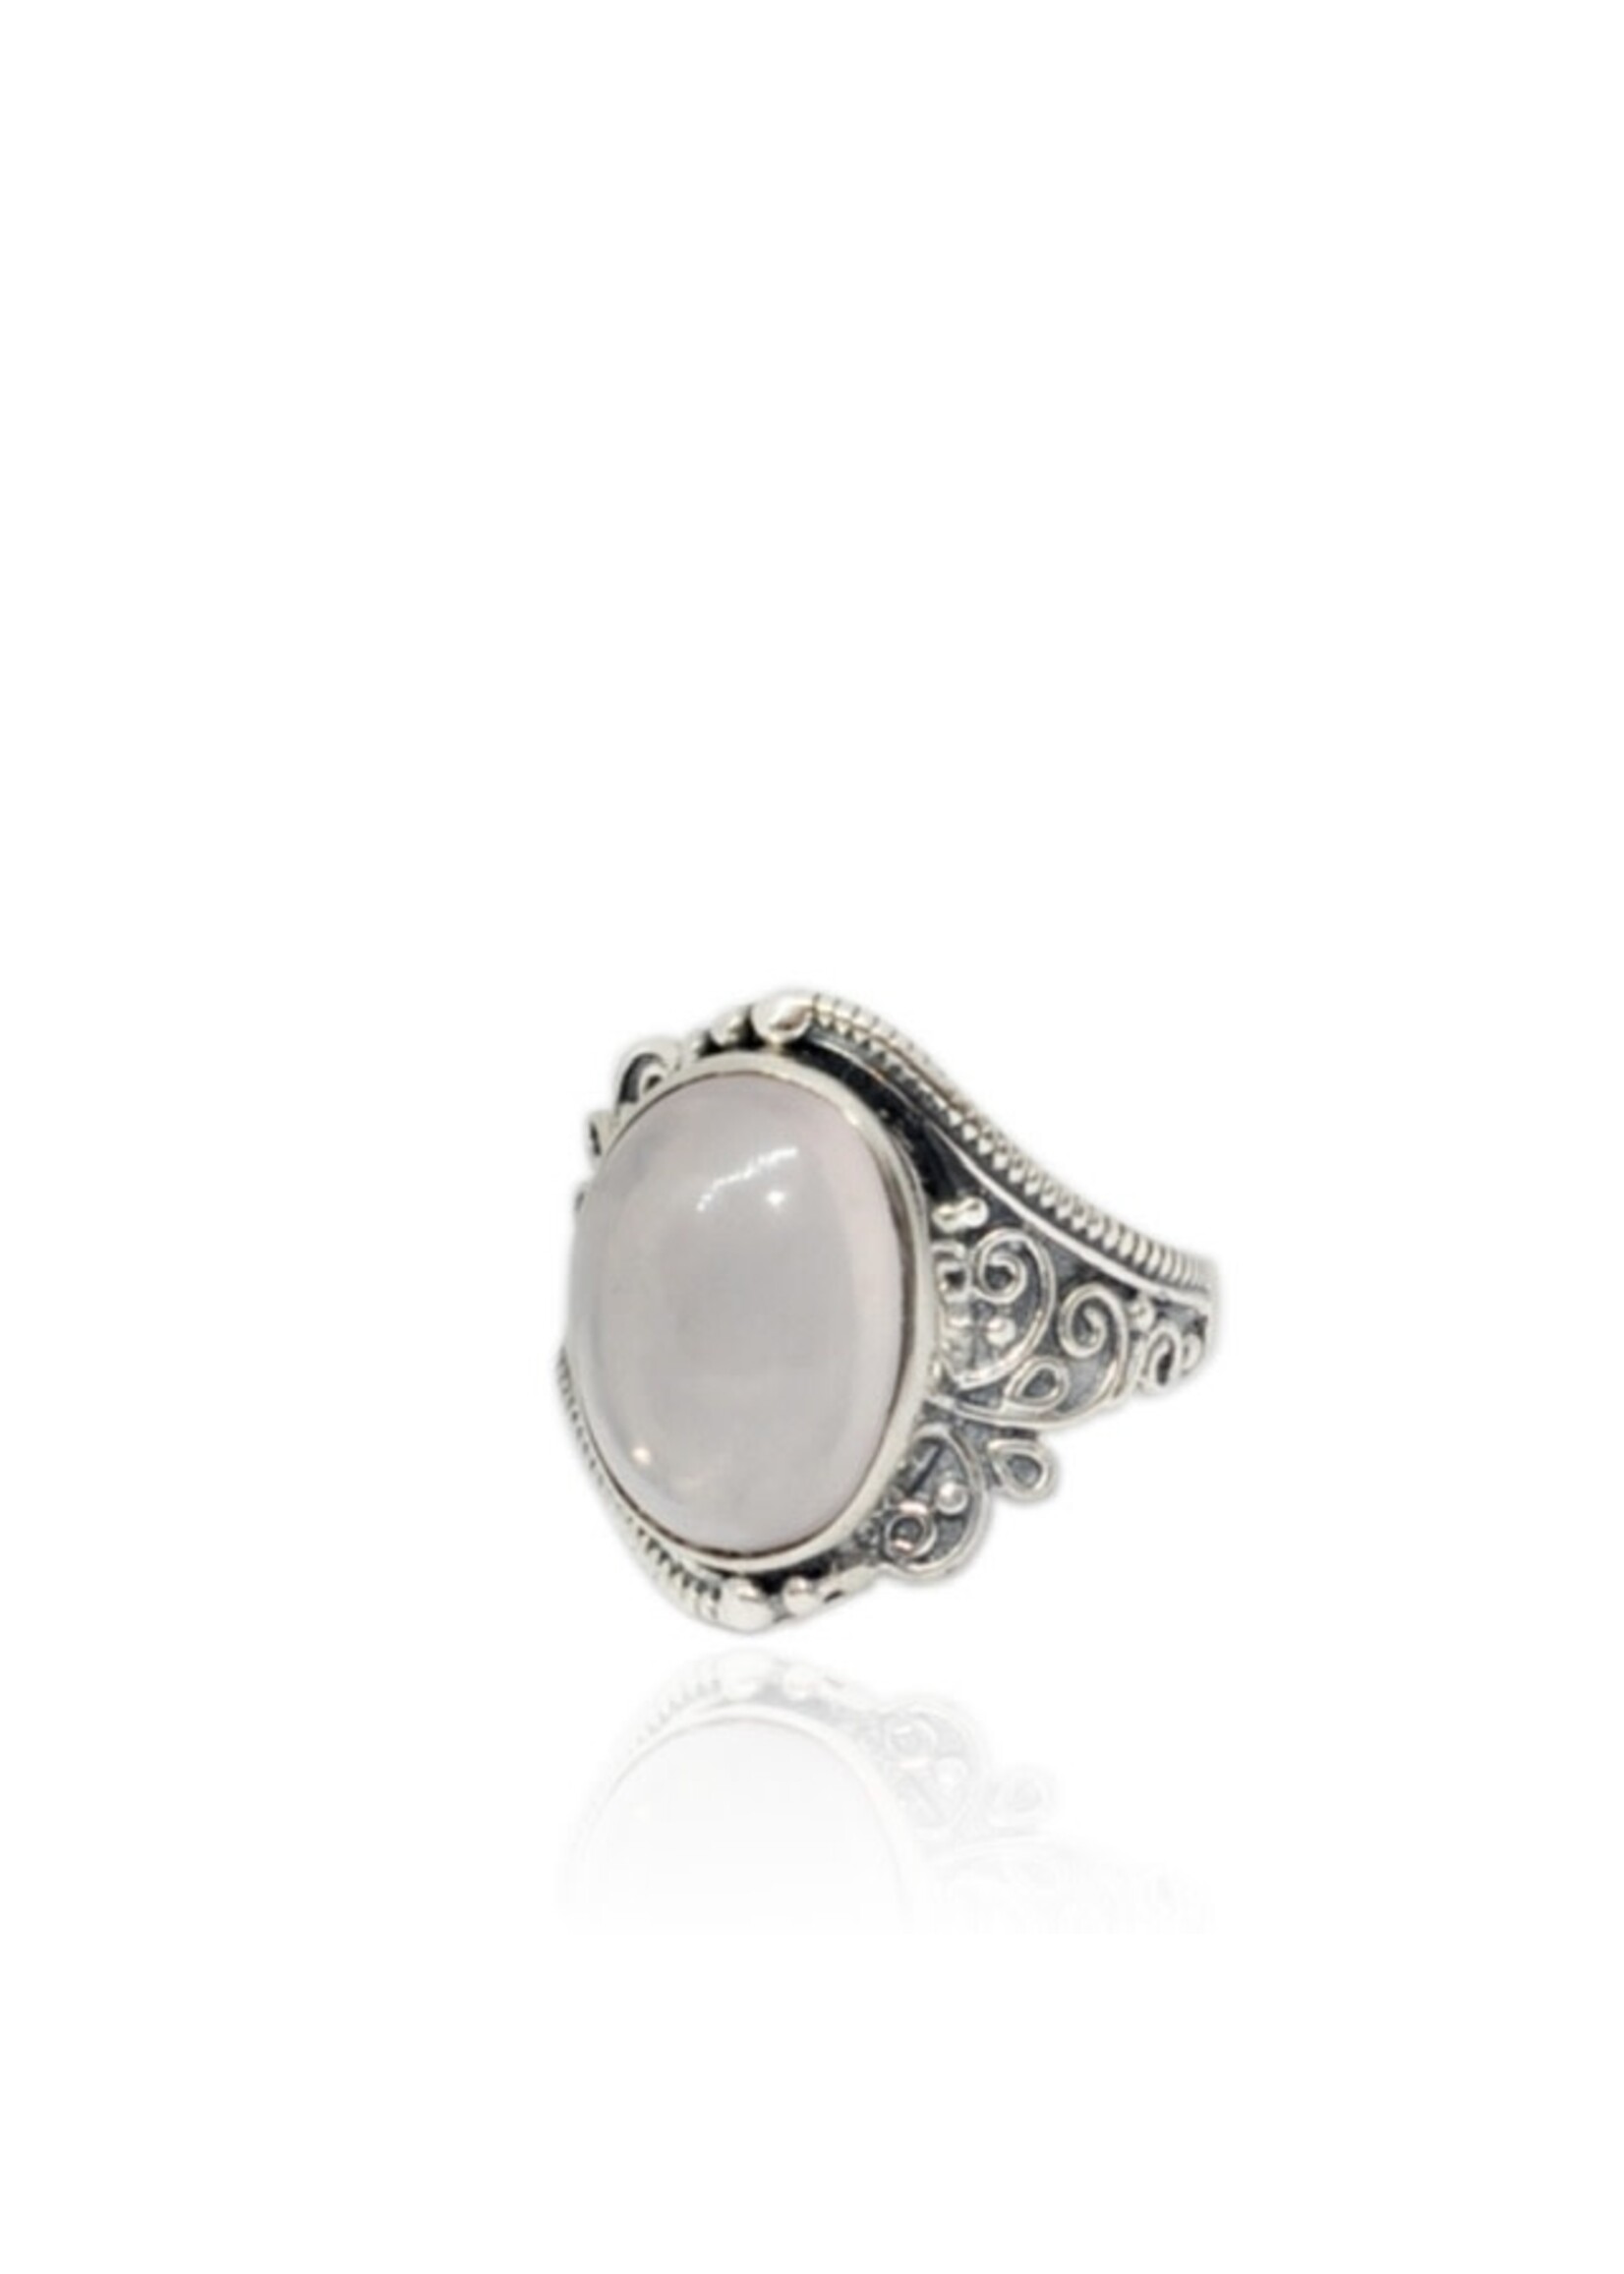 BALINESE DESIGN MOONSTONE RING SET IN STERLING SILVER, 10 X 14MM.